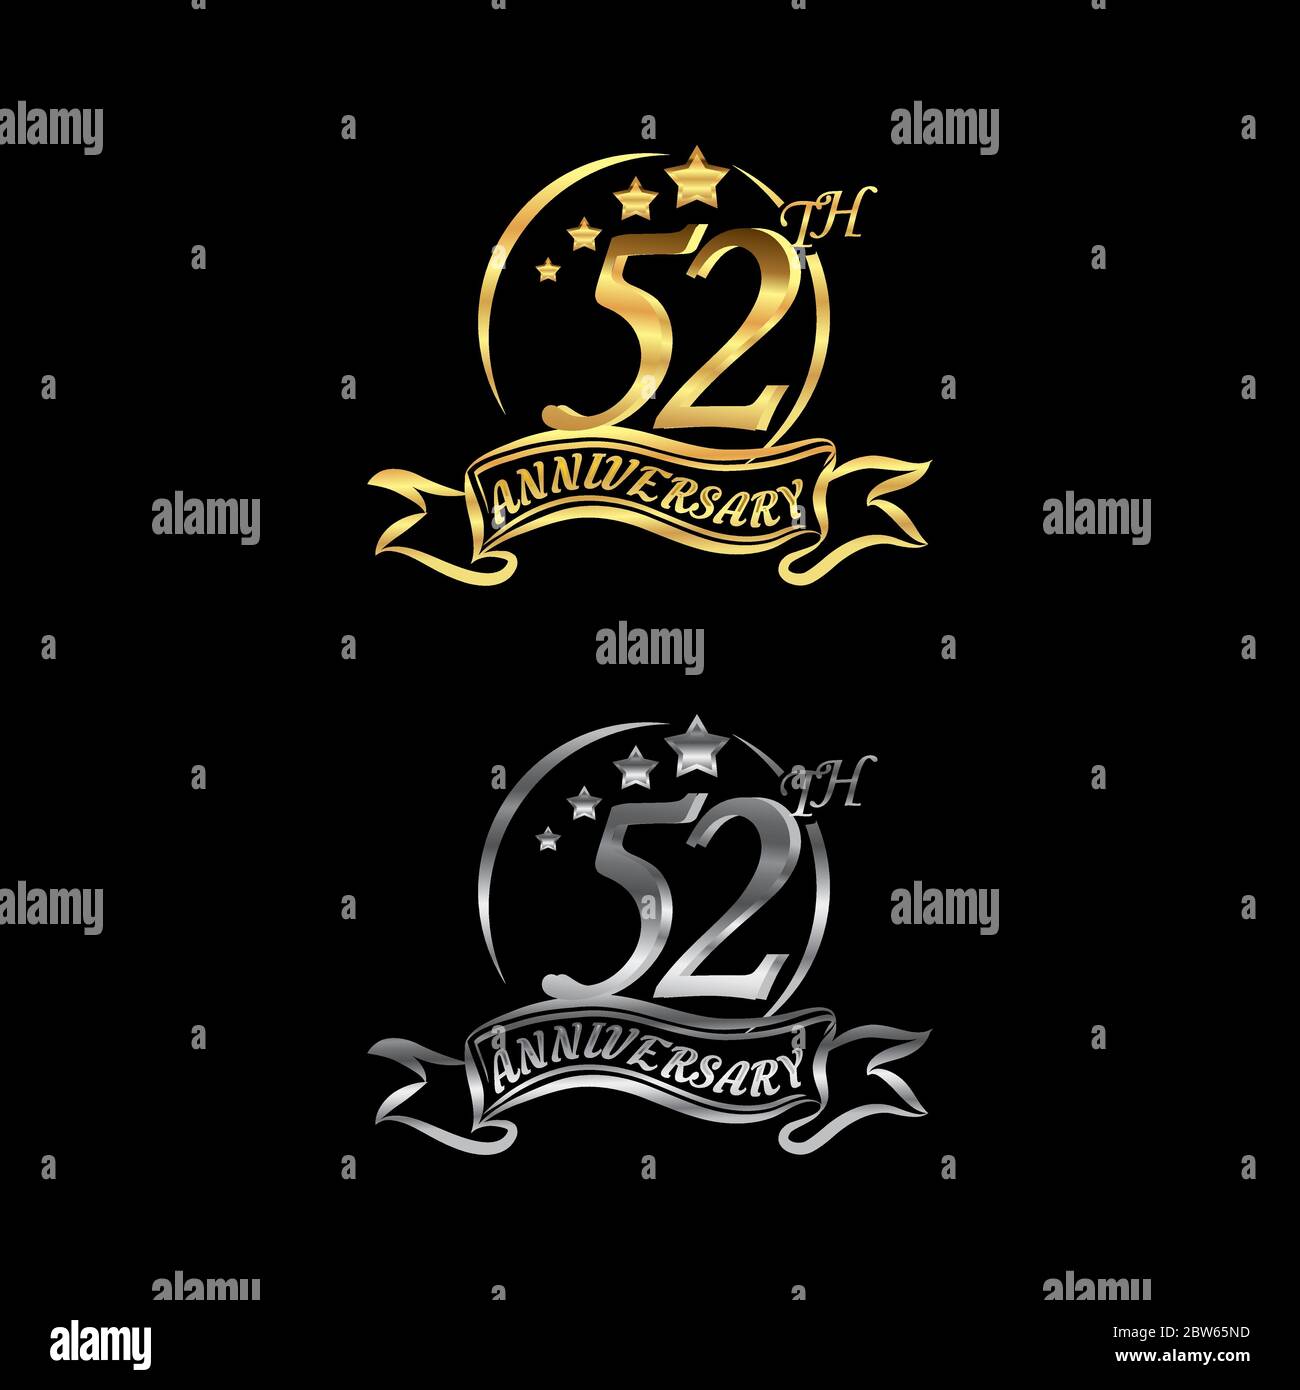 Celebrating the 52th anniversary logo,star shape, with gold and silver rings and gradation ribbons isolated on a black background.EPS 10 Stock Vector